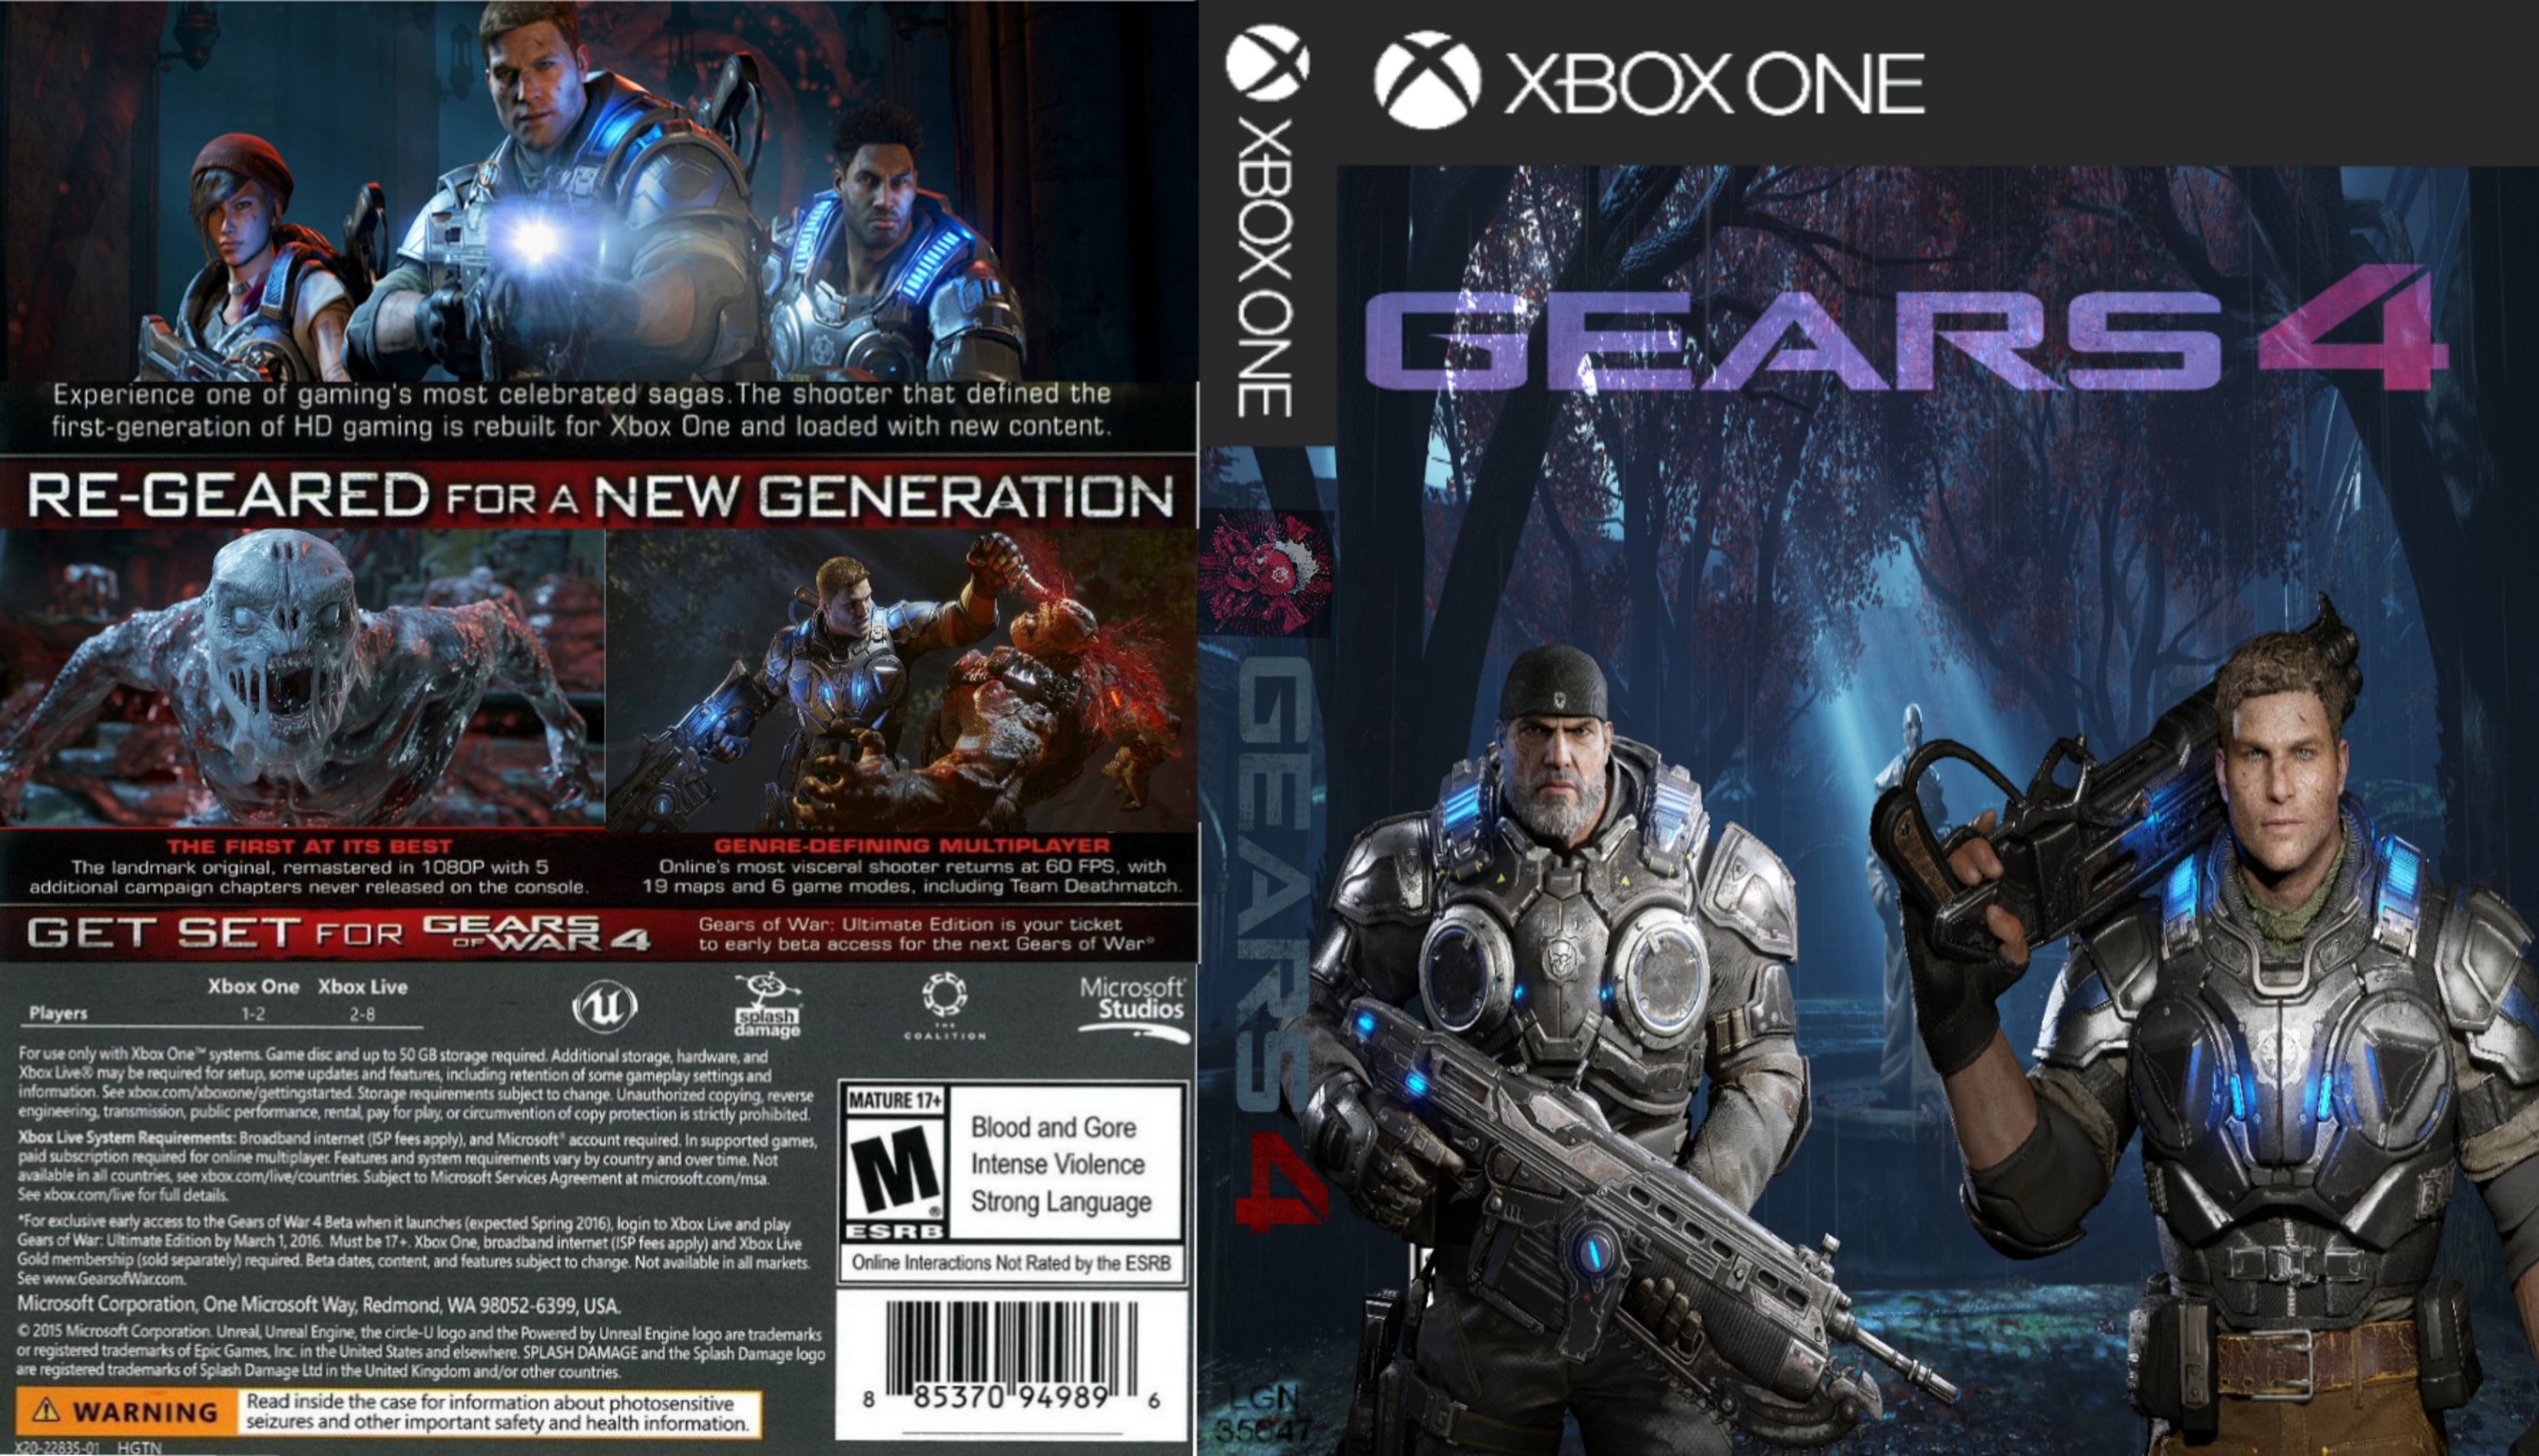 Gears of war 4 box cover